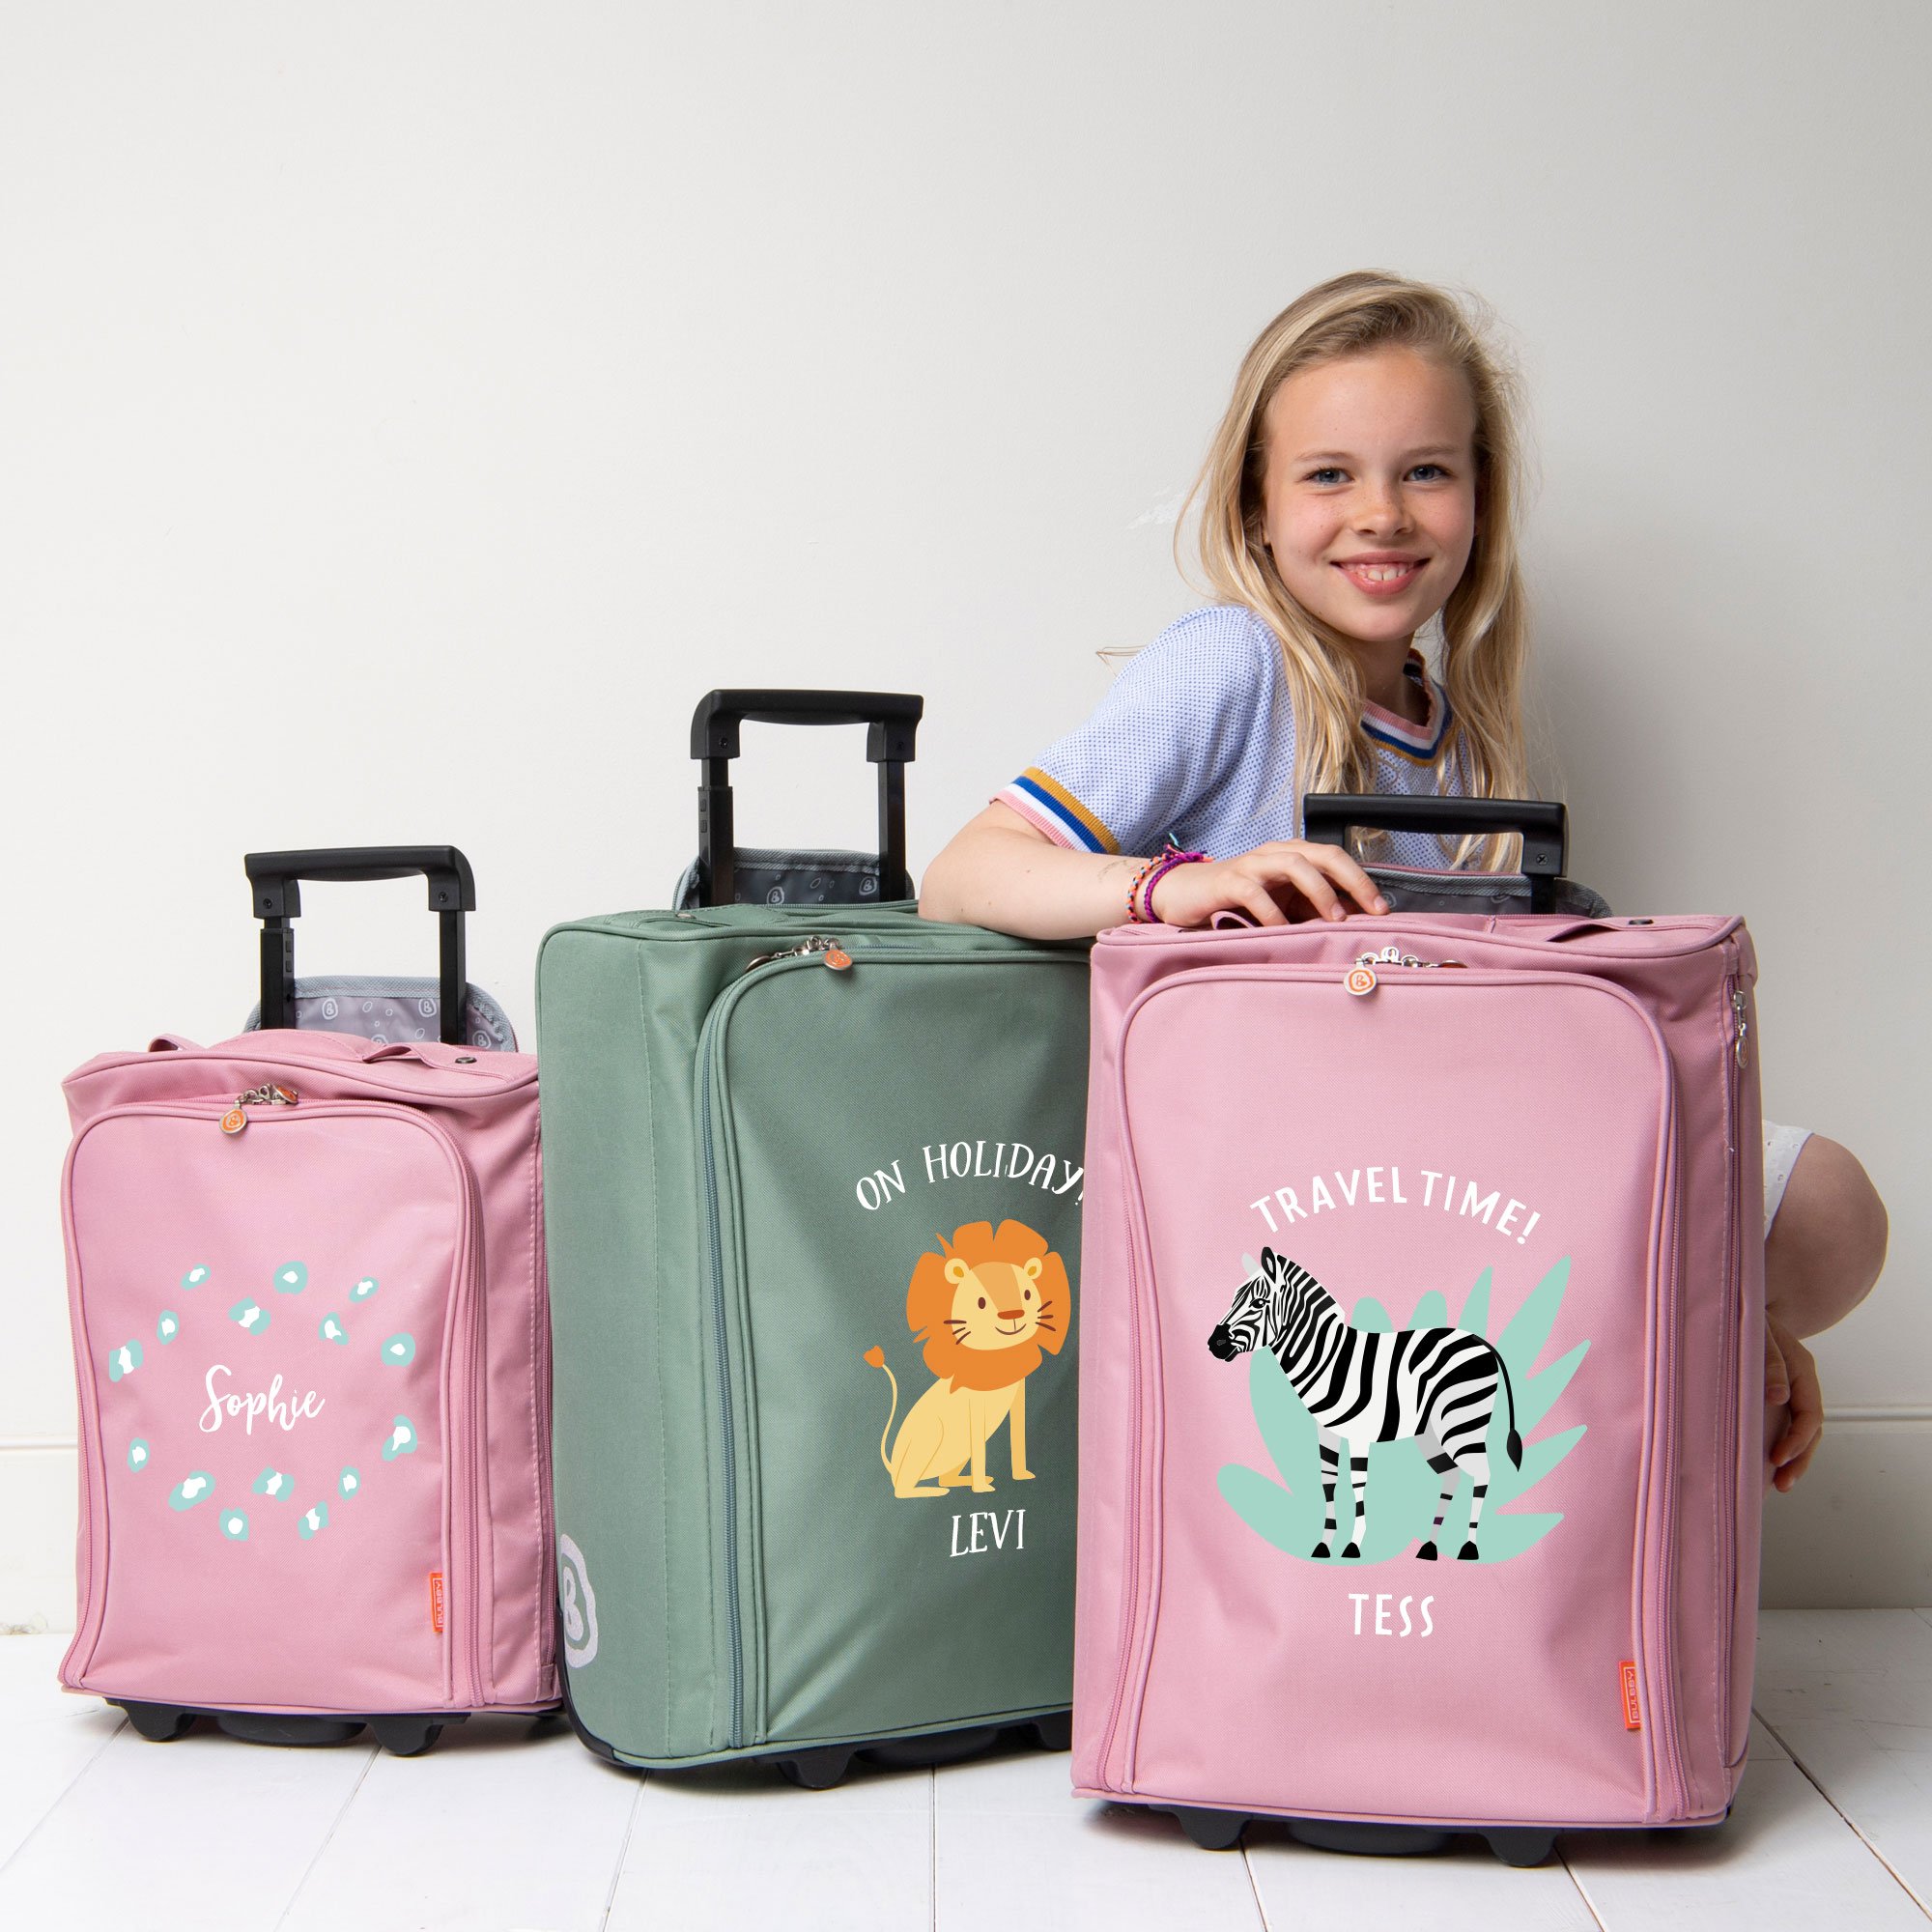 Girl with cute travel trolleys printed with own name